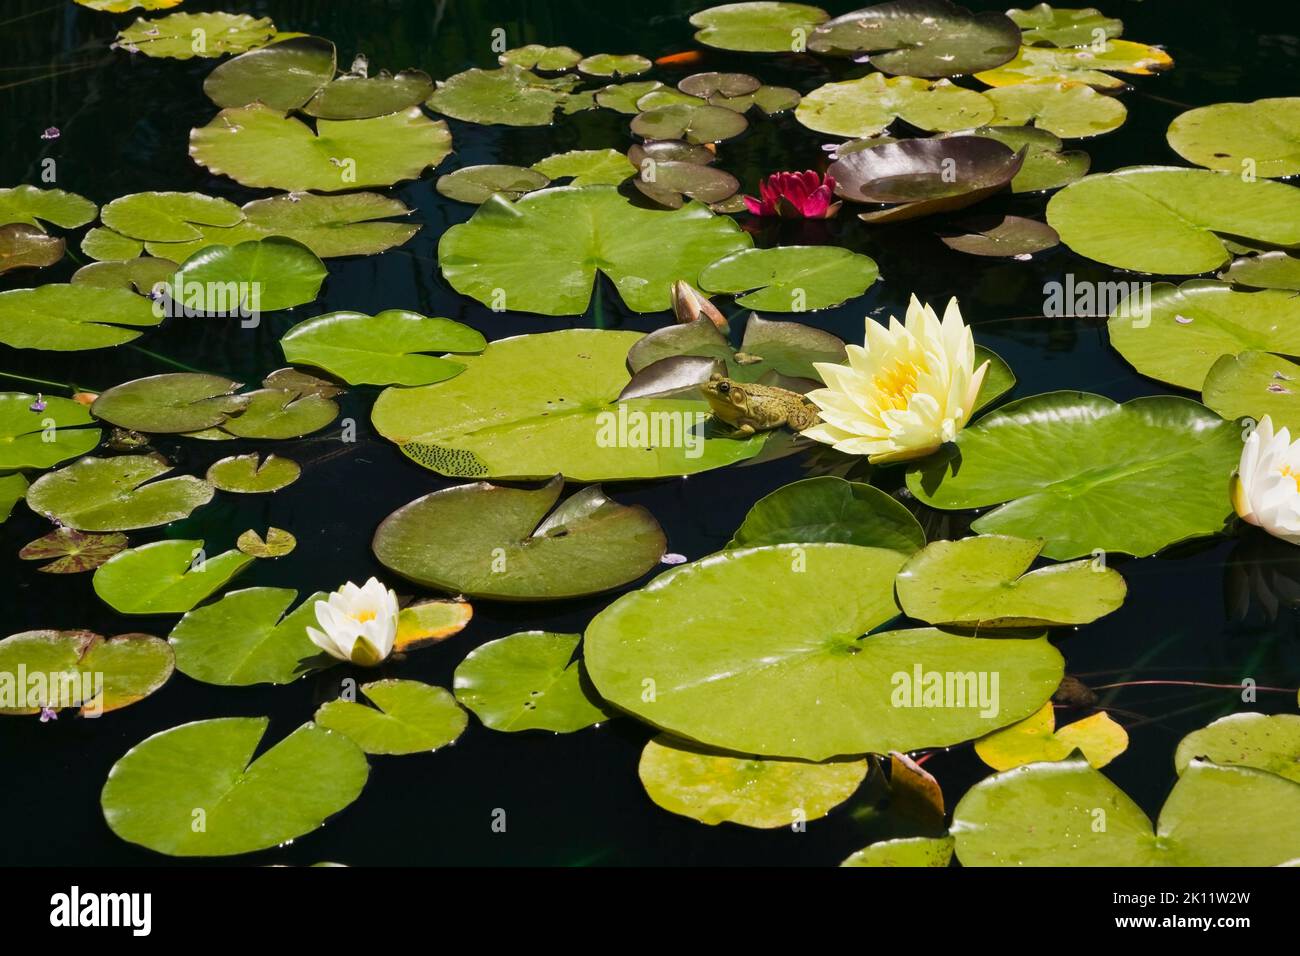 Yellow and white Nymphaea - Waterlily flowers with Rana clamitans - Green Frog on pond surface in spring. Stock Photo